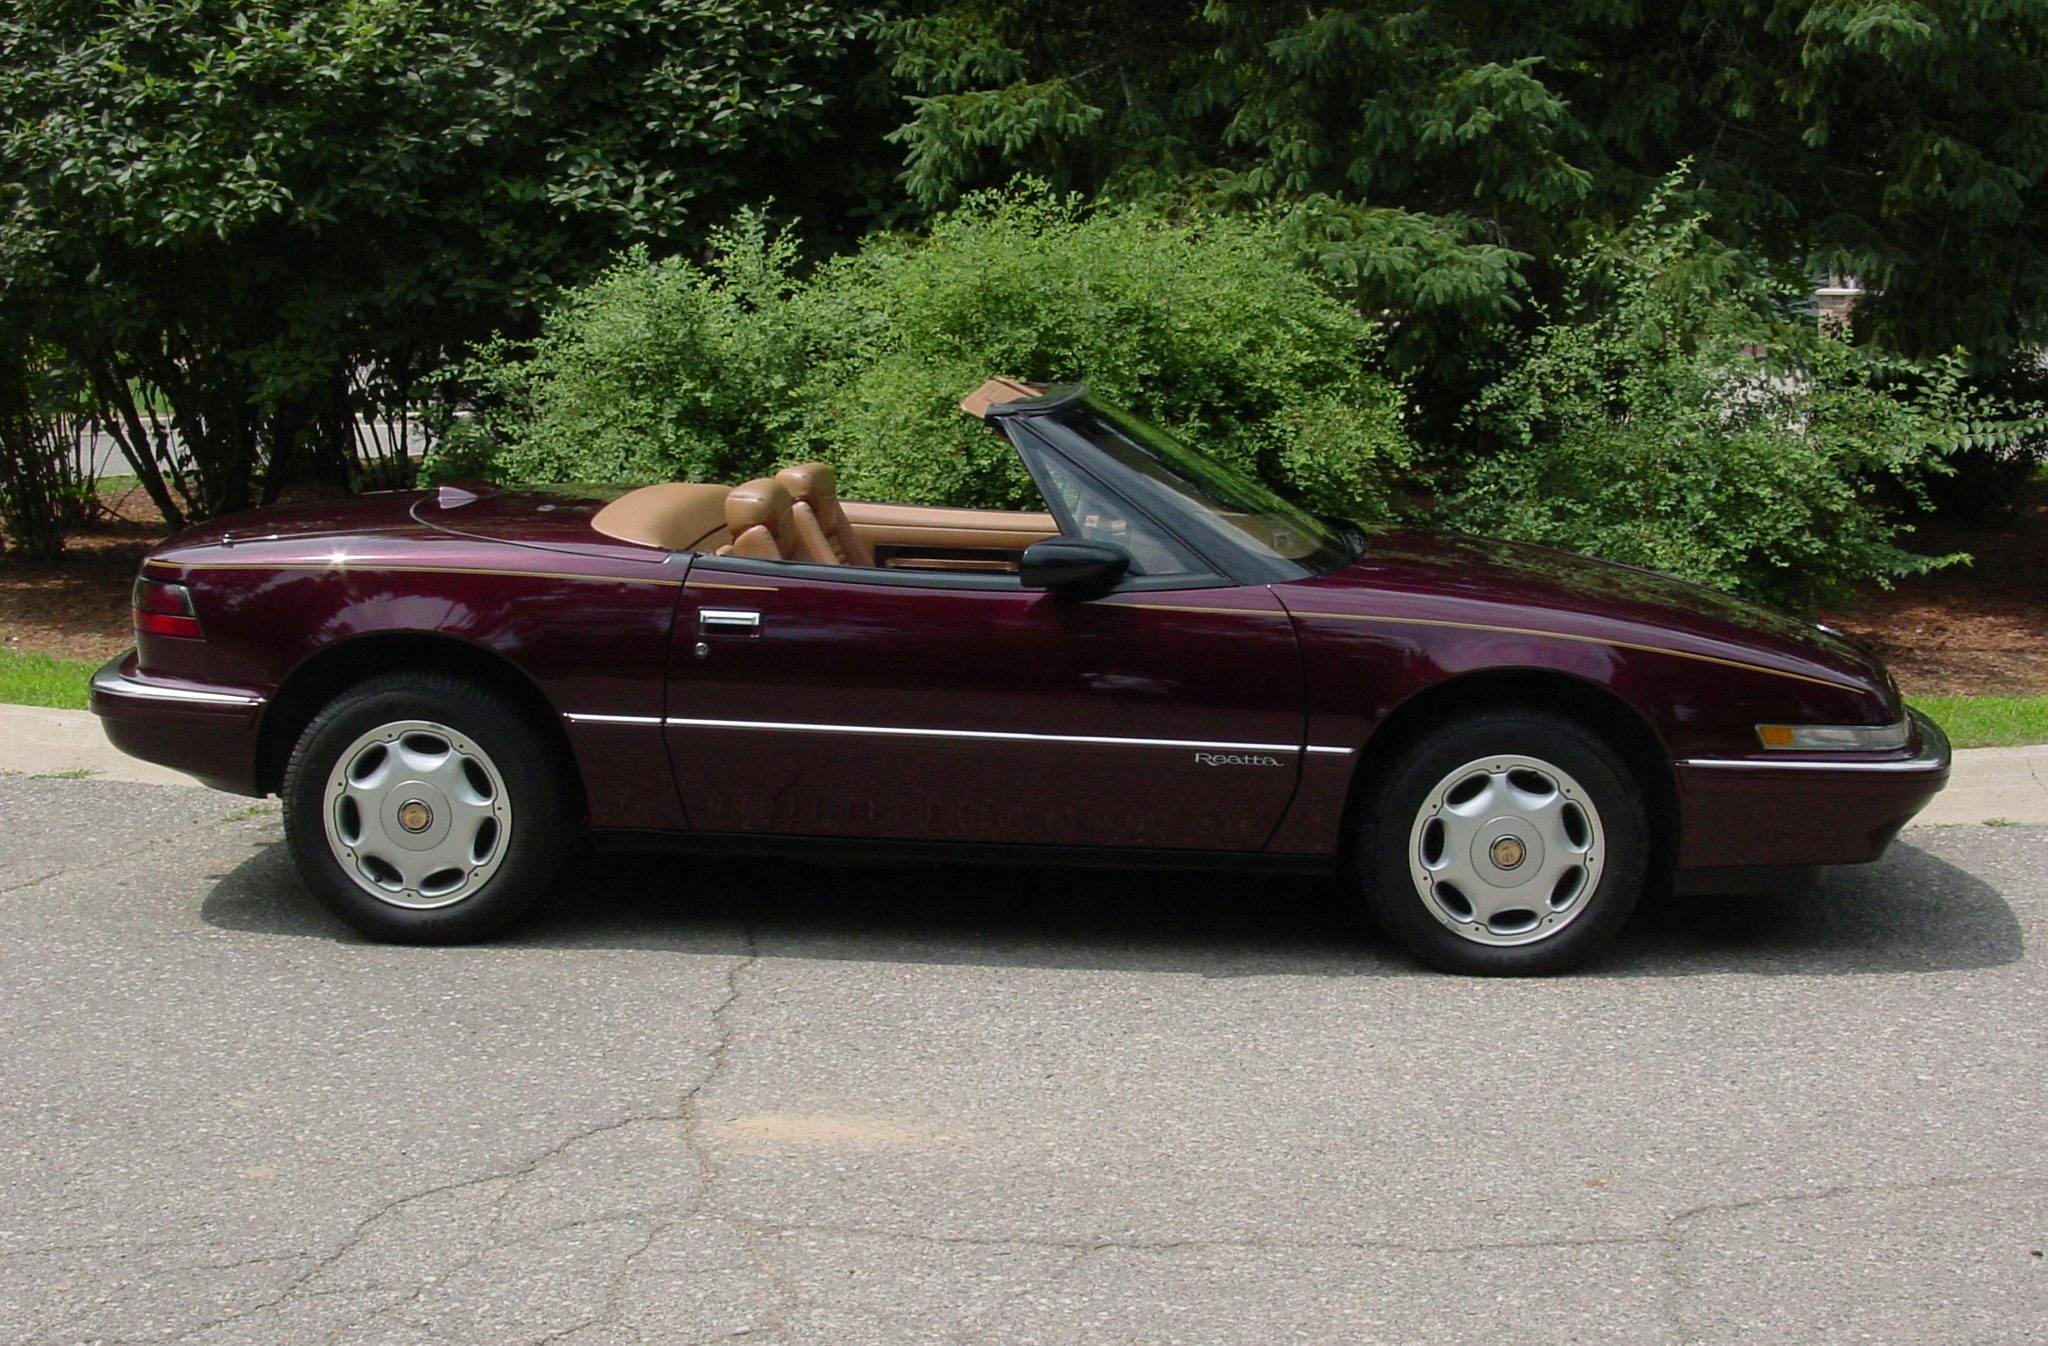 Reatta Convertible Coupe Side Profile On Street